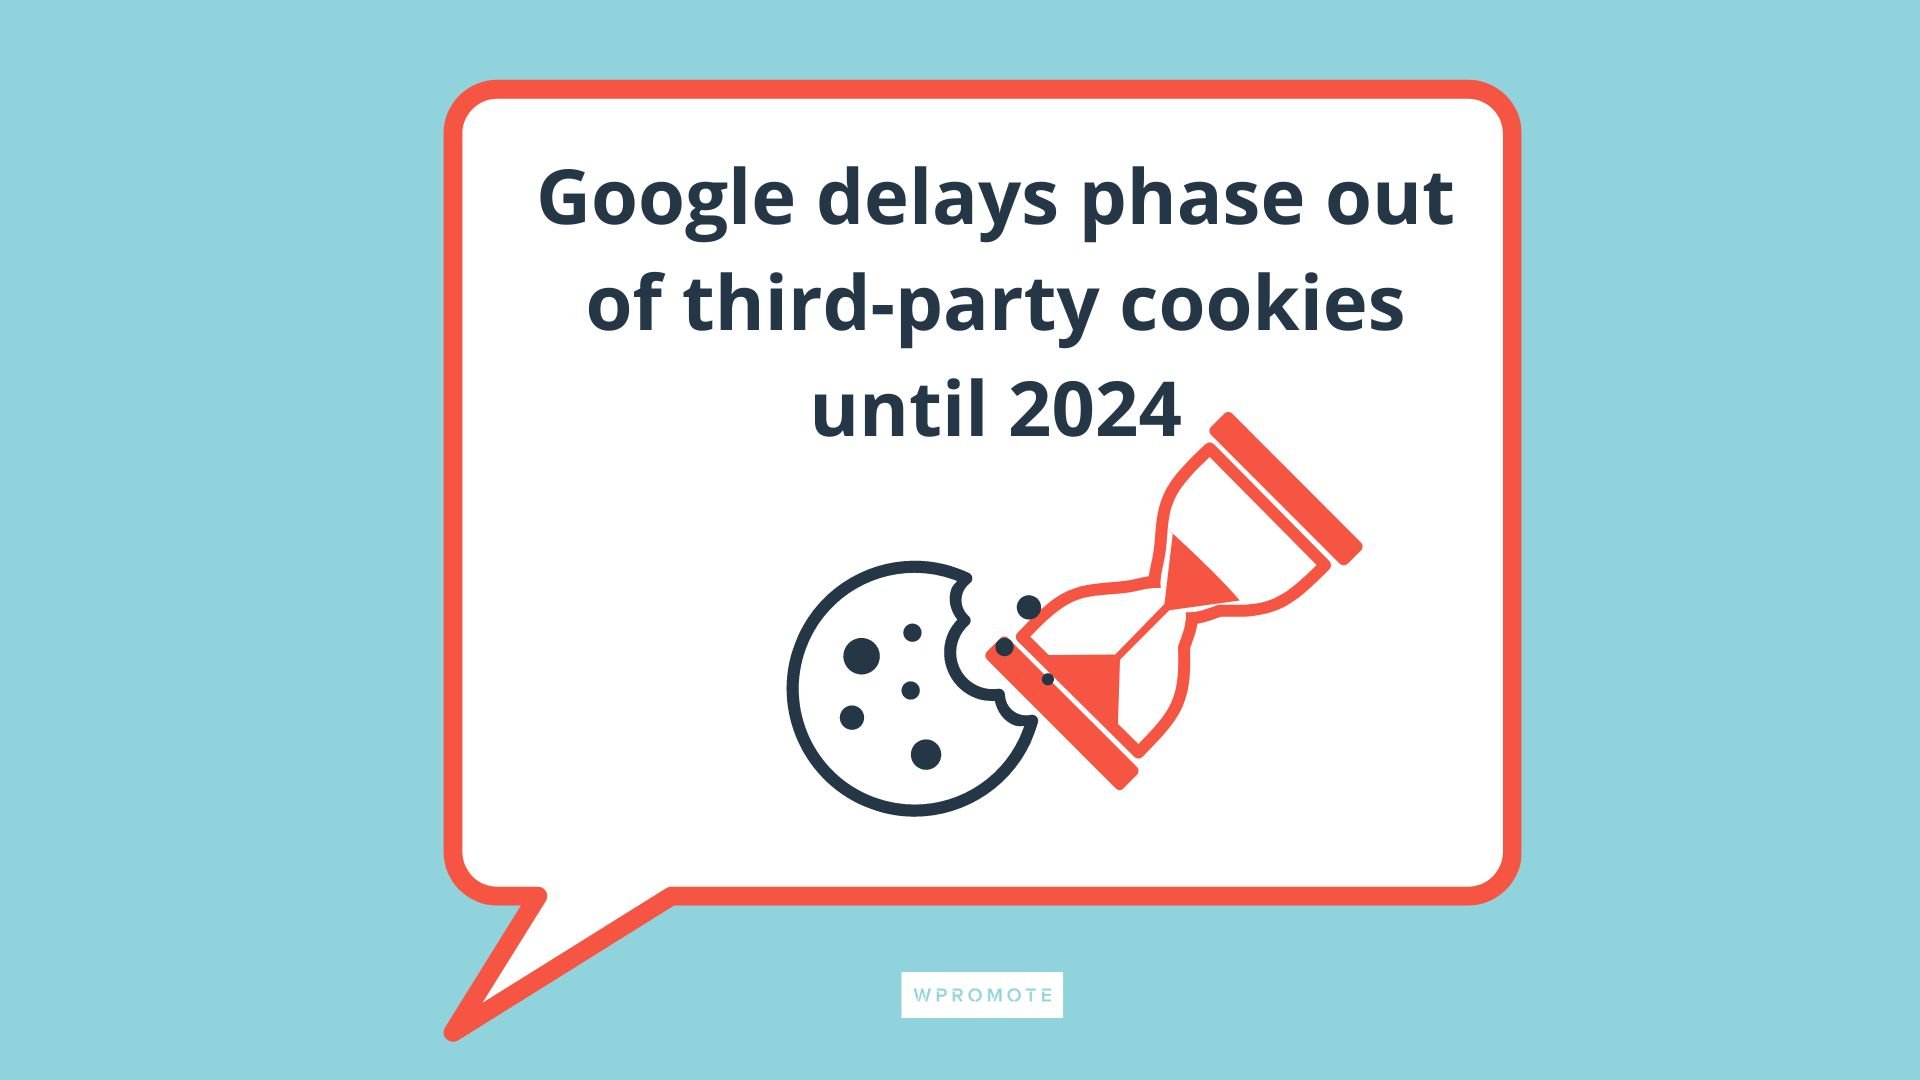 Google delays phase out of third-party cookies until 2024